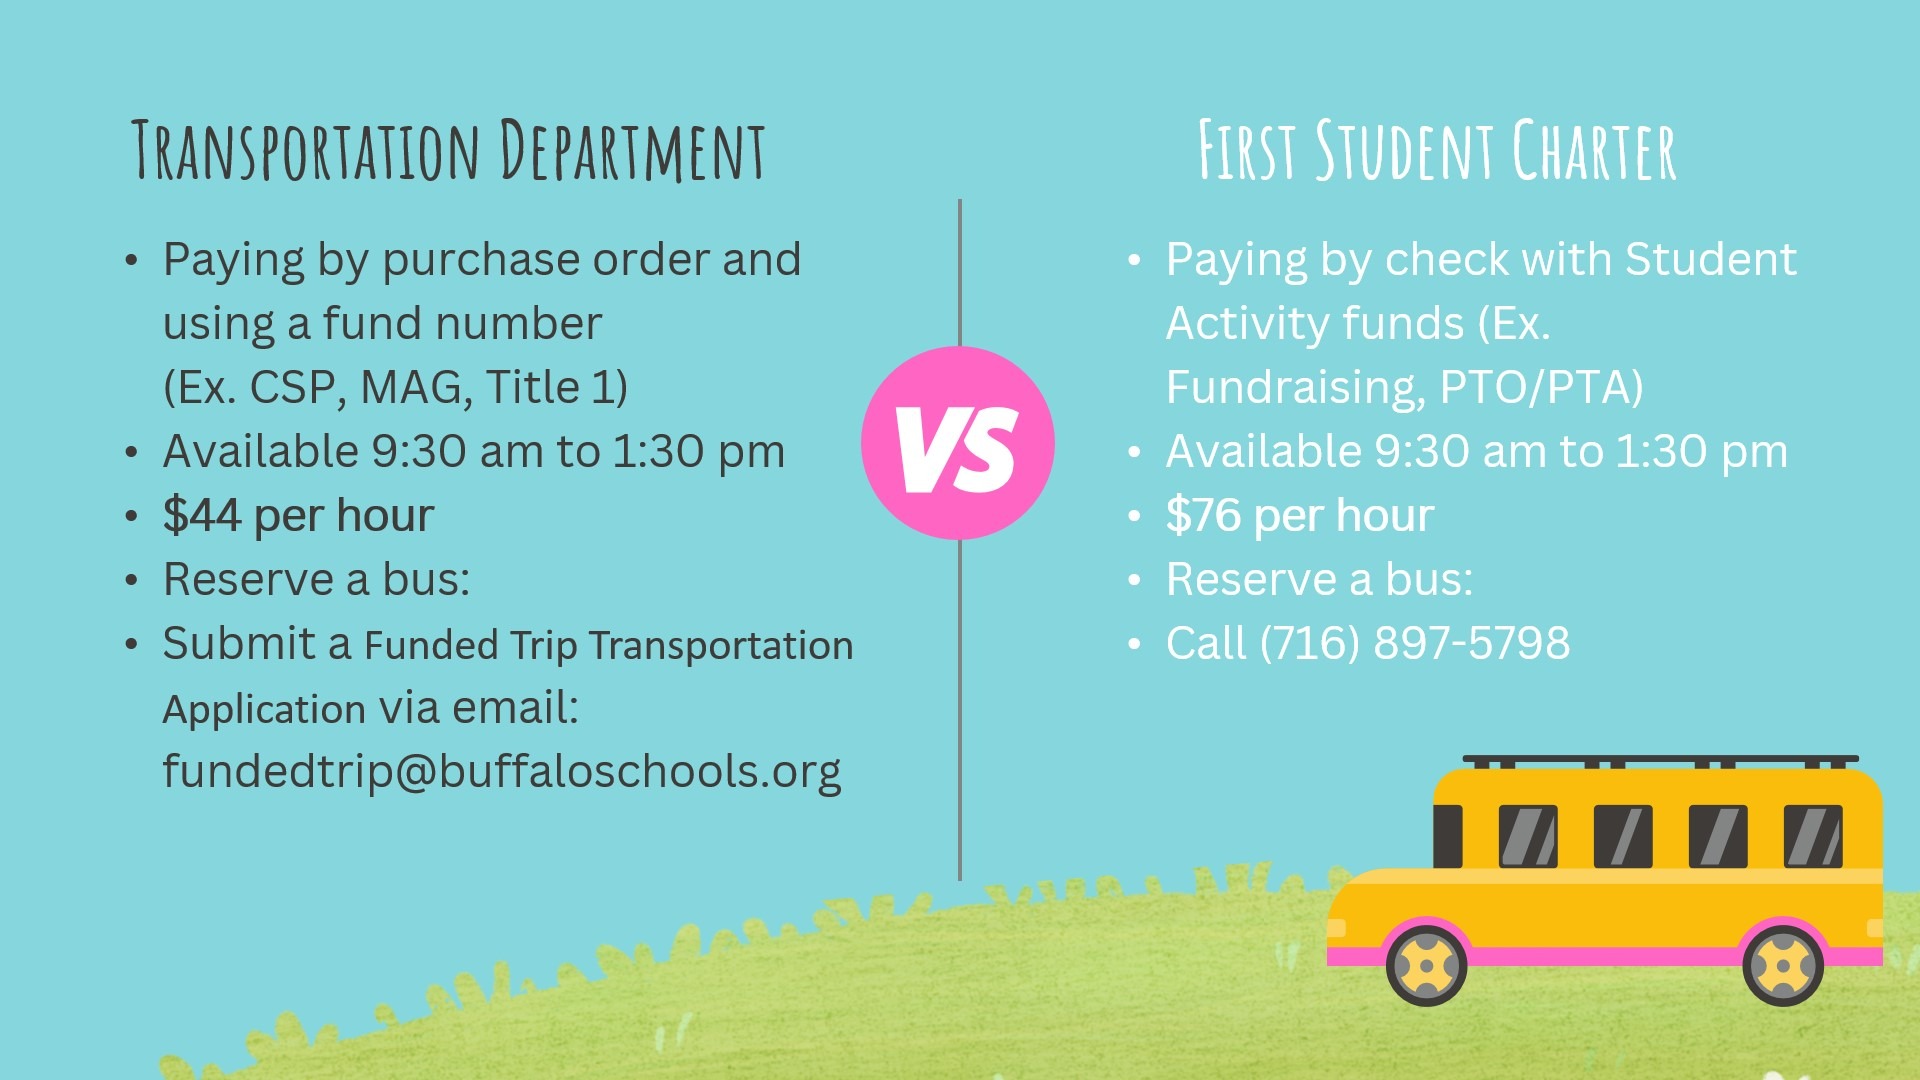 TRANSPORTATION DEPARTMENT •  Paying by purchase order and using a fund number (Ex. CSP, MAG, Title 1) Available 9:30 am to 1:30 pm • $44 per hour • Reserve a bus:Submit a Funded Trip Transportation Application via email: fundedtrip@buffaloschools.org  VS  FIRST STUDENT CHARTER Paying by check with Student Activity funds (Ex. Fundraising, PTO/PTA) Available 9:30 am to 1:30 pm $76 per hour Reserve a bus: Call (716) 897-5798